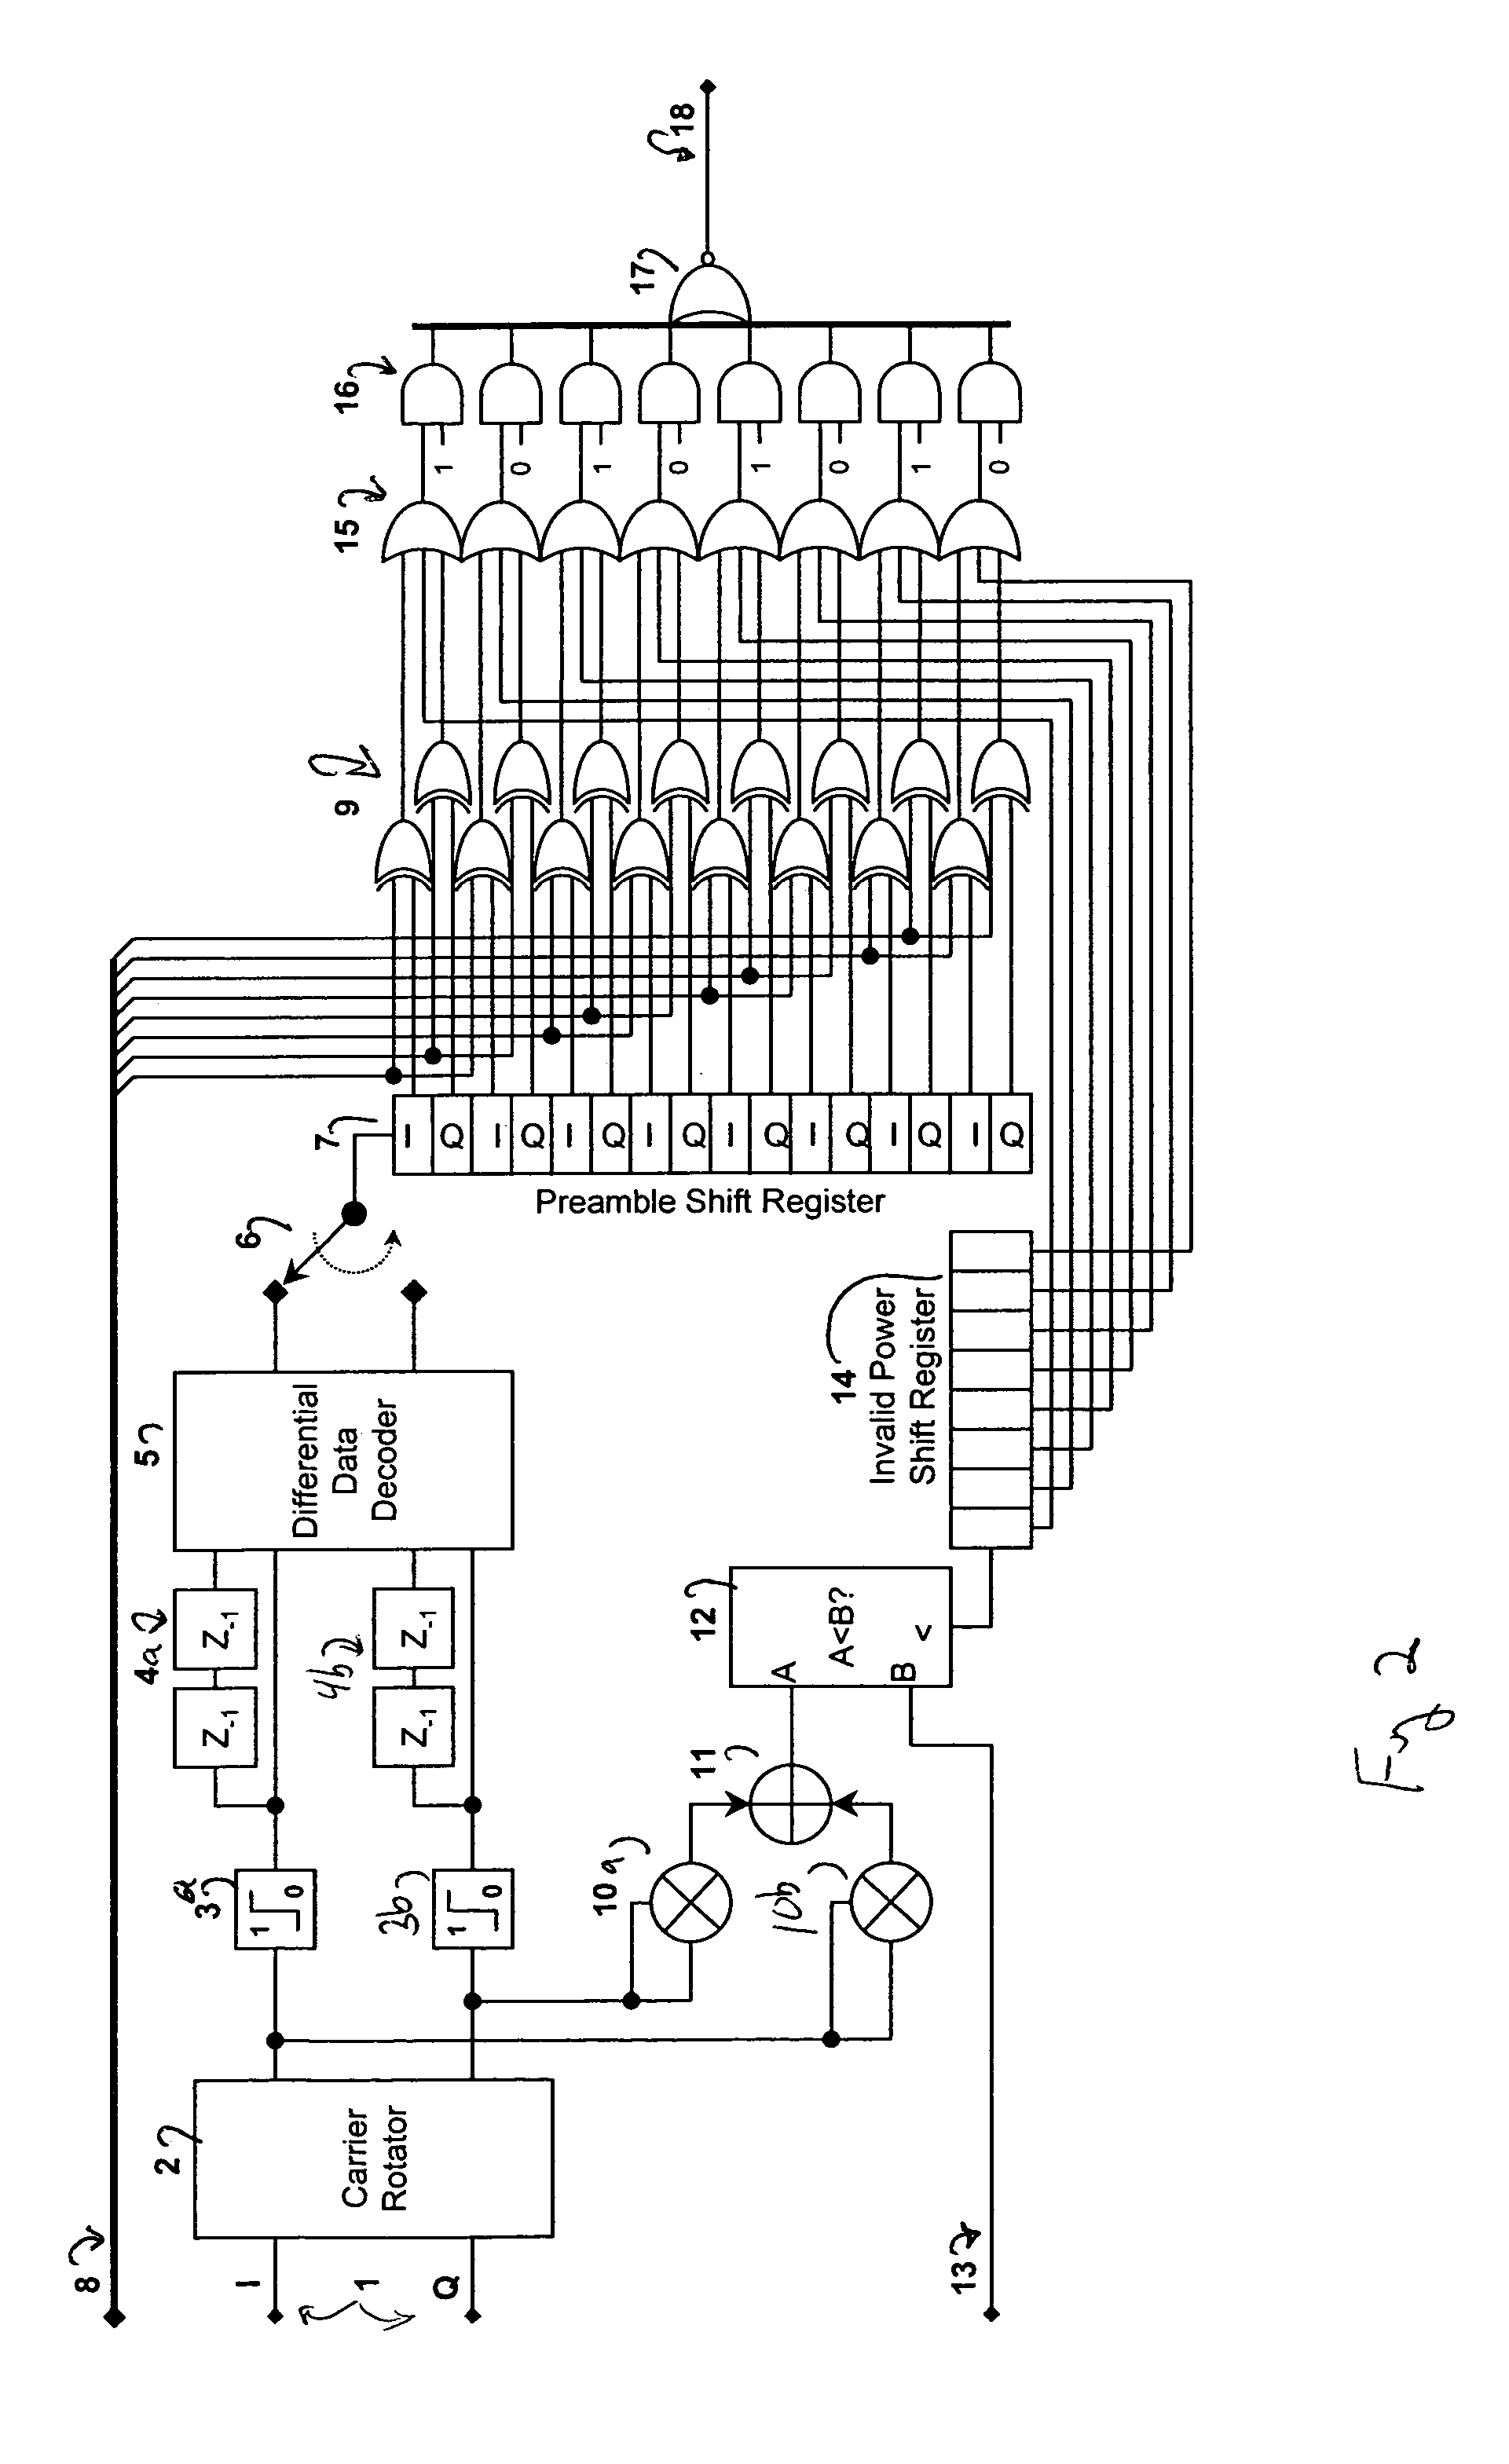 Method and apparatus for efficient preamble detection in digital data receivers